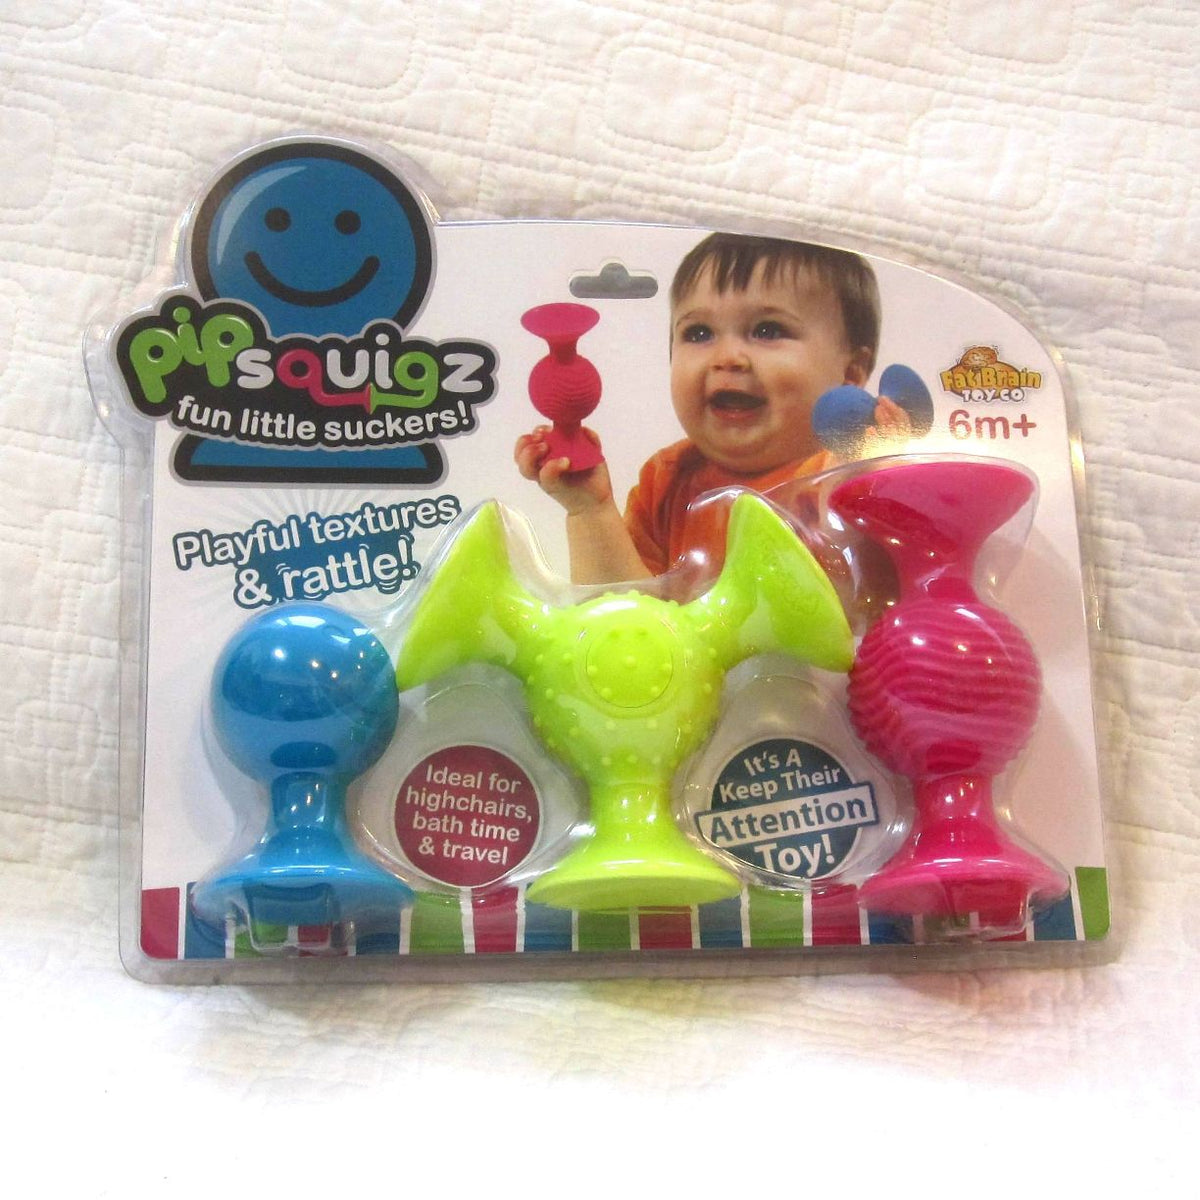 Pipsquigz Rattle Teether Suction Cup